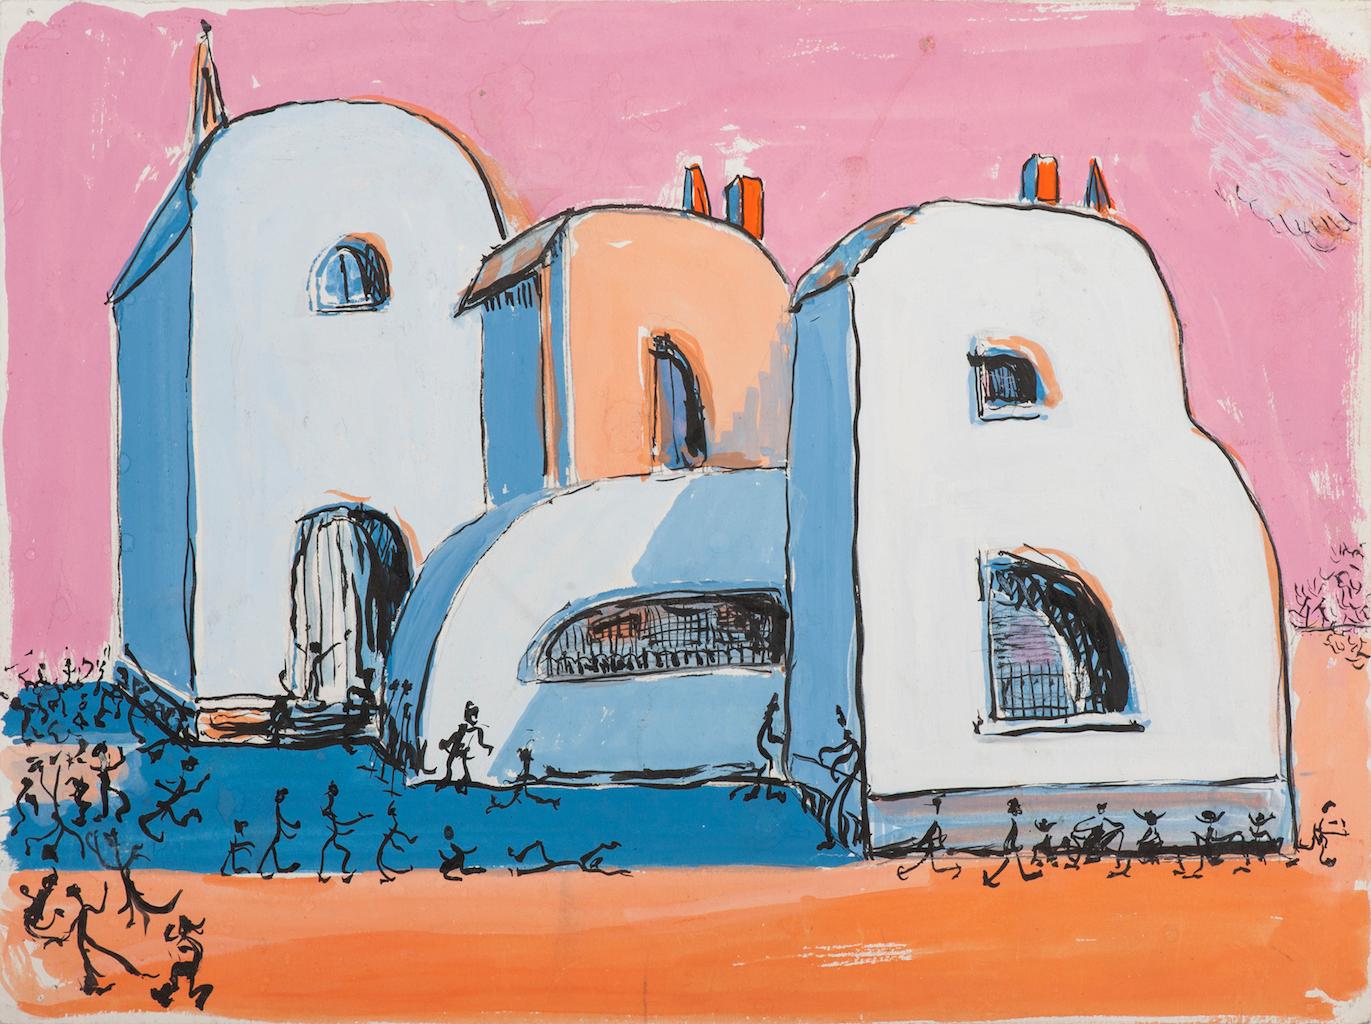 Unknown Figurative Art - Invented Houses - Original Tempera on Paper - 1960s